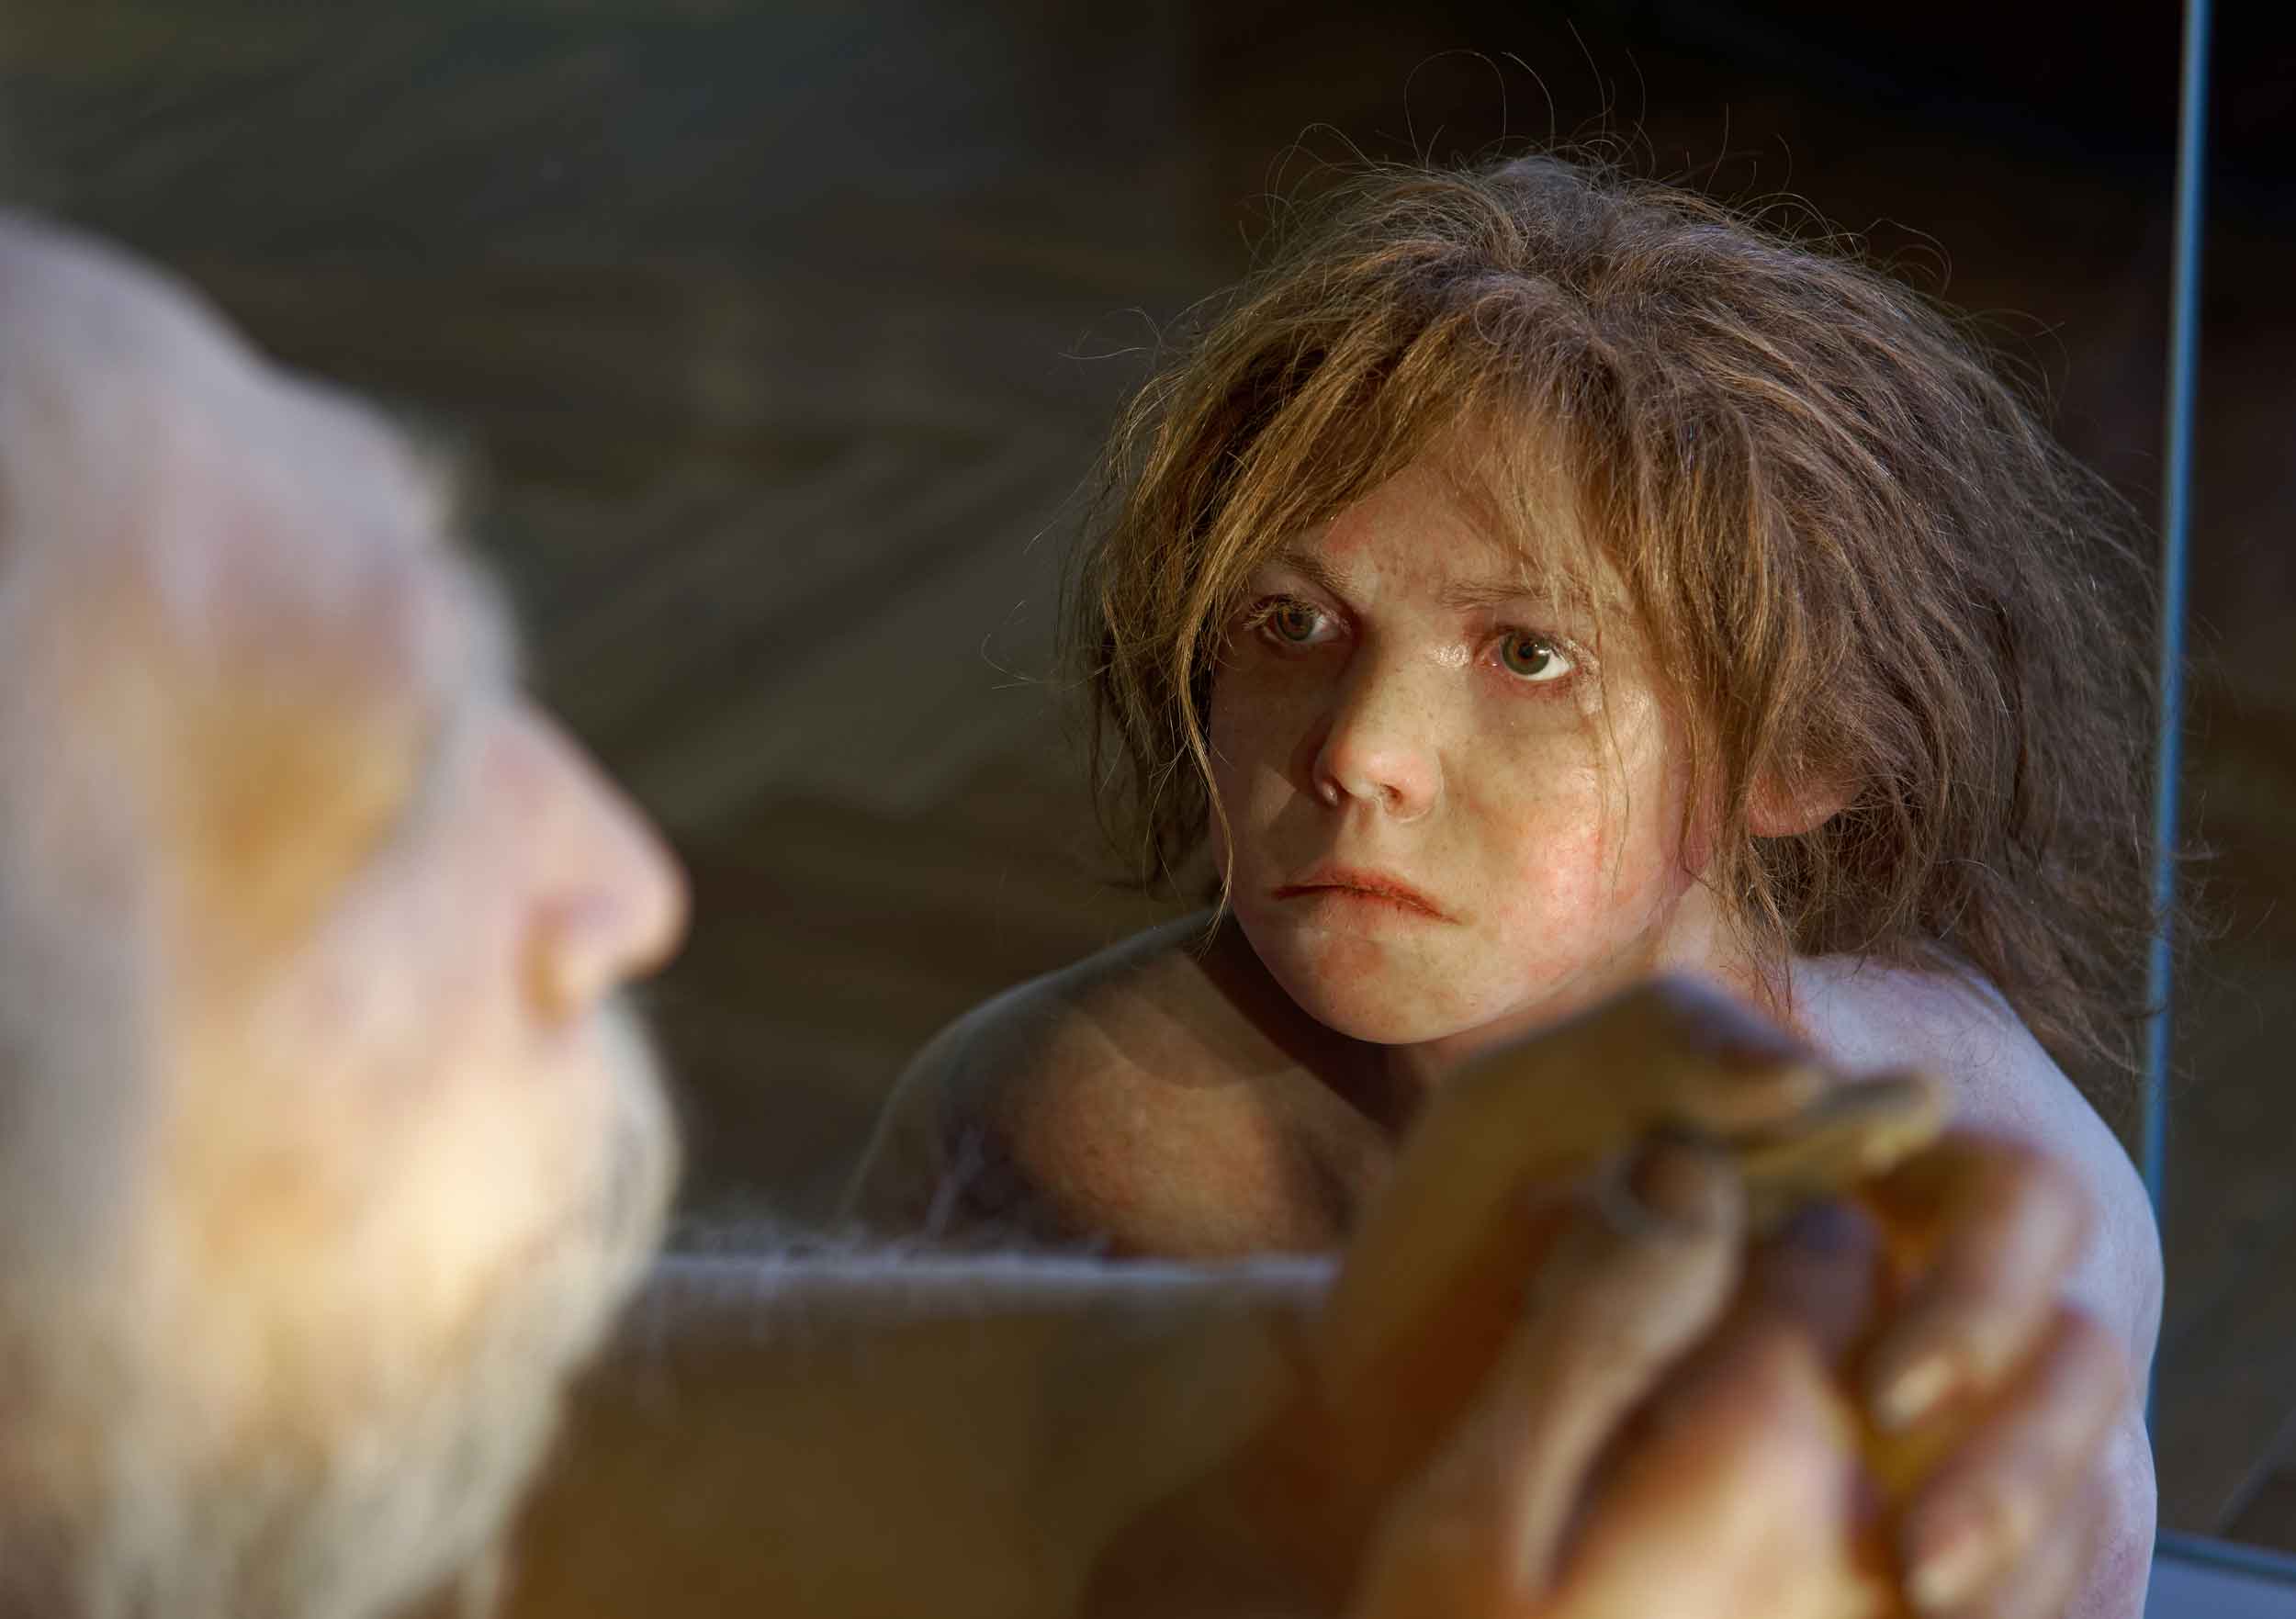 A child with vaguely Neandertal features looking up at an older man